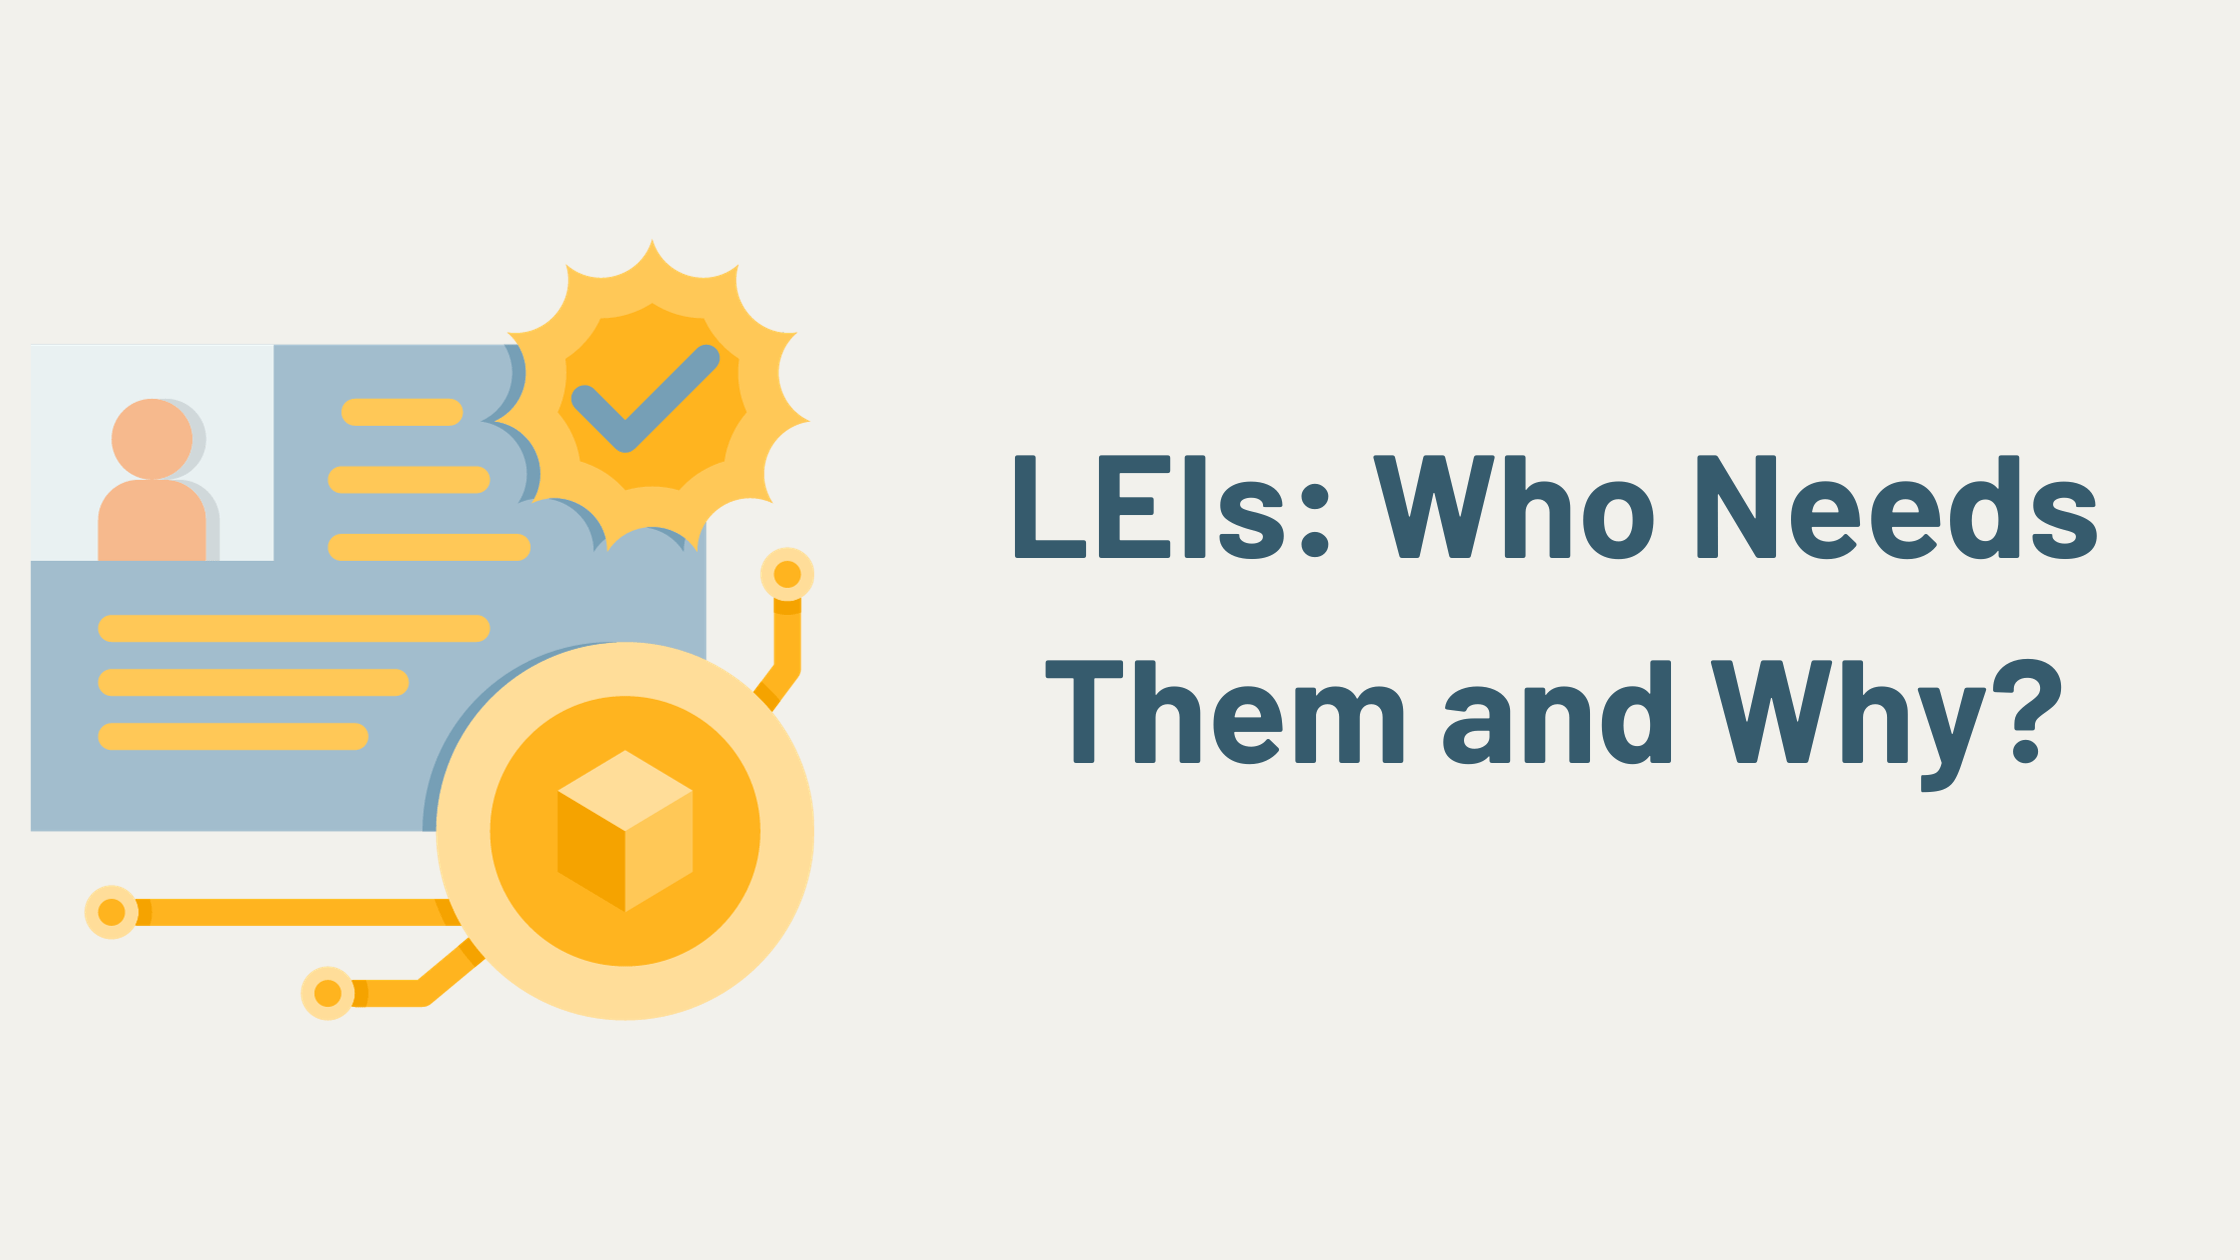 LEIs: Who Needs Them and Why?